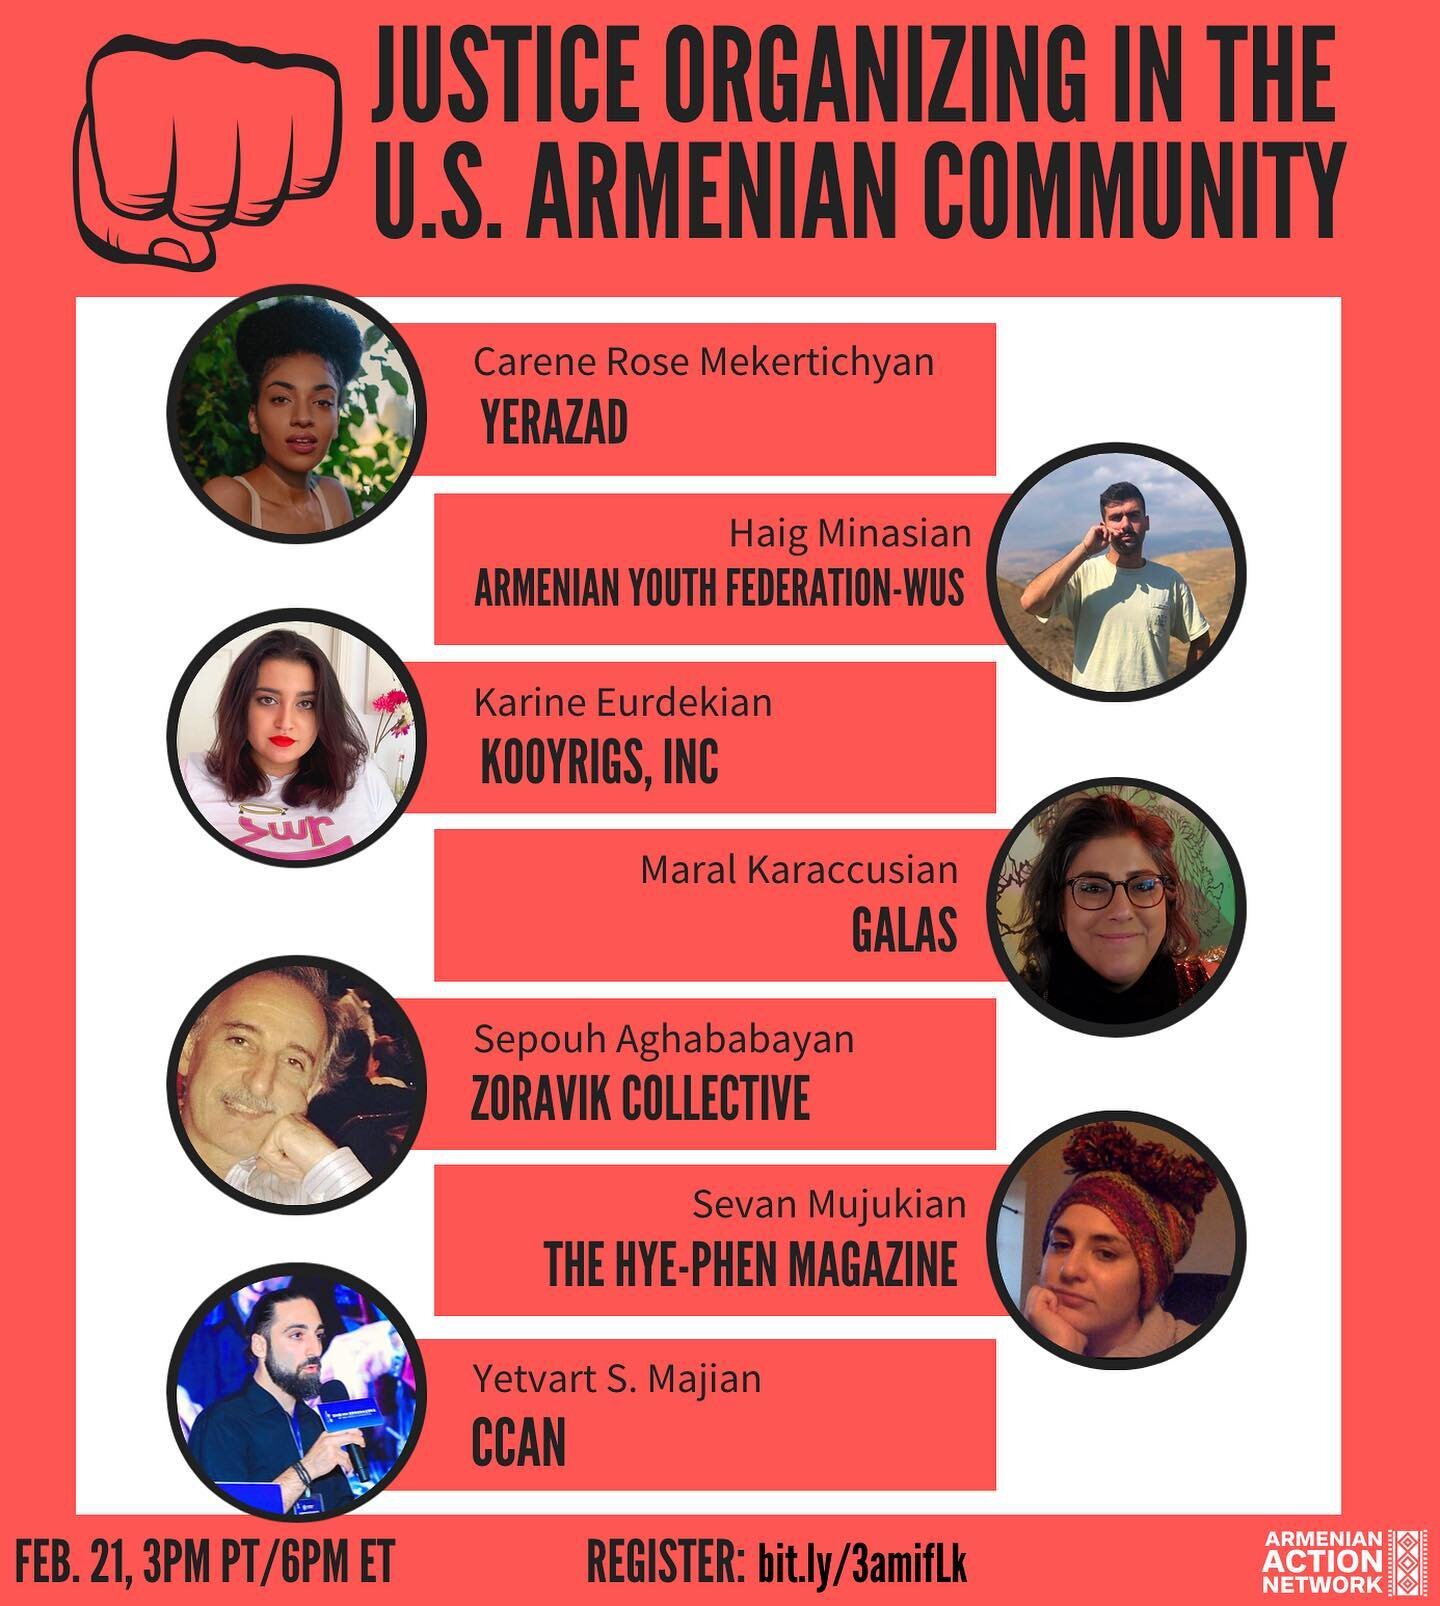 Join us for &ldquo;Justice Organizing in the U.S. Armenian Community:&rdquo; from Racial &amp; Gender Justice to the Struggle in our Homeland, presented by Armenian Action Network. Join us for a conversation with organizations building justice in the